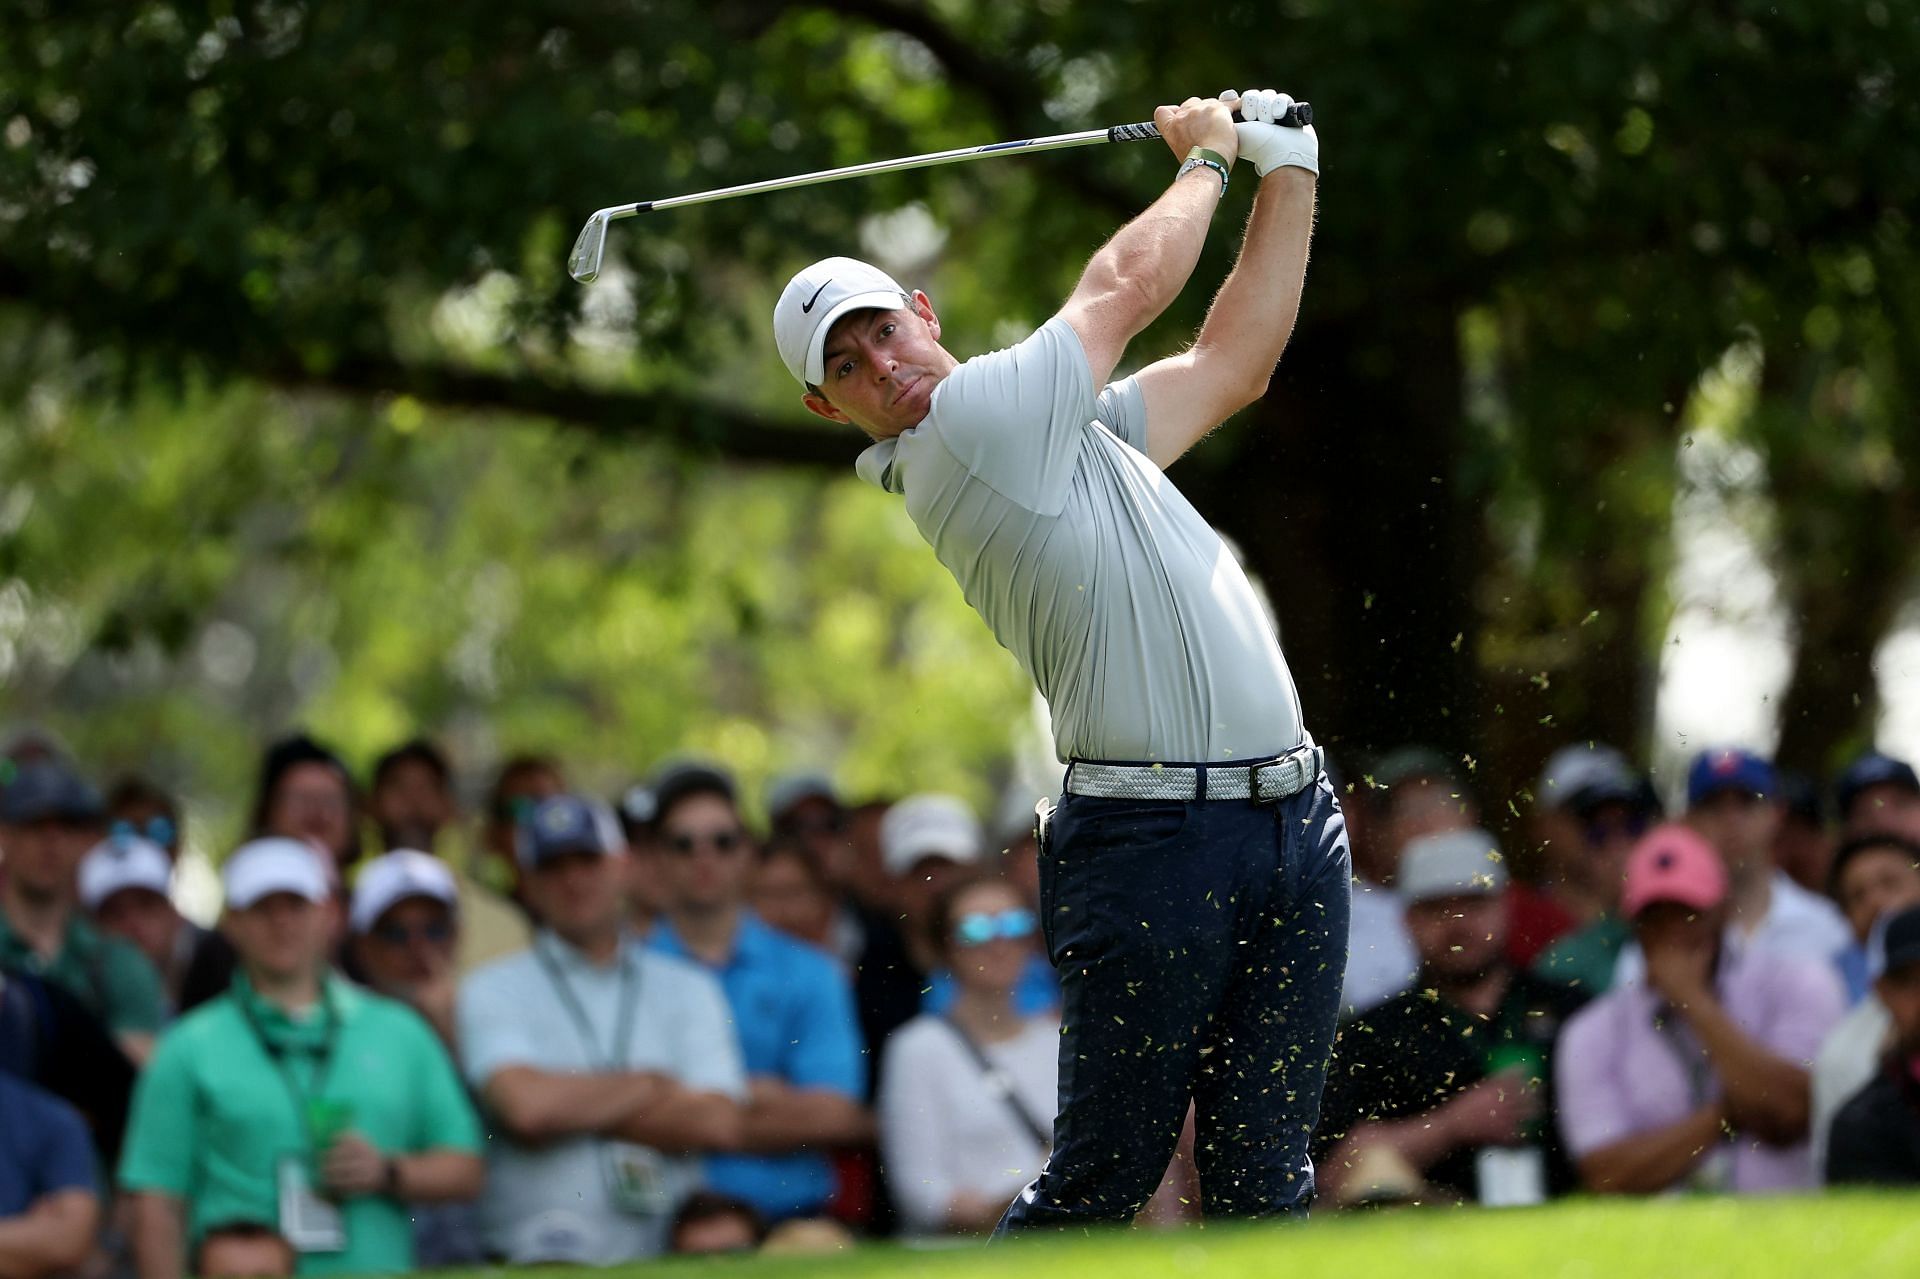 “It doesn't matter who you are”: Justin Thomas reacts to Rory McIlroy’s ...